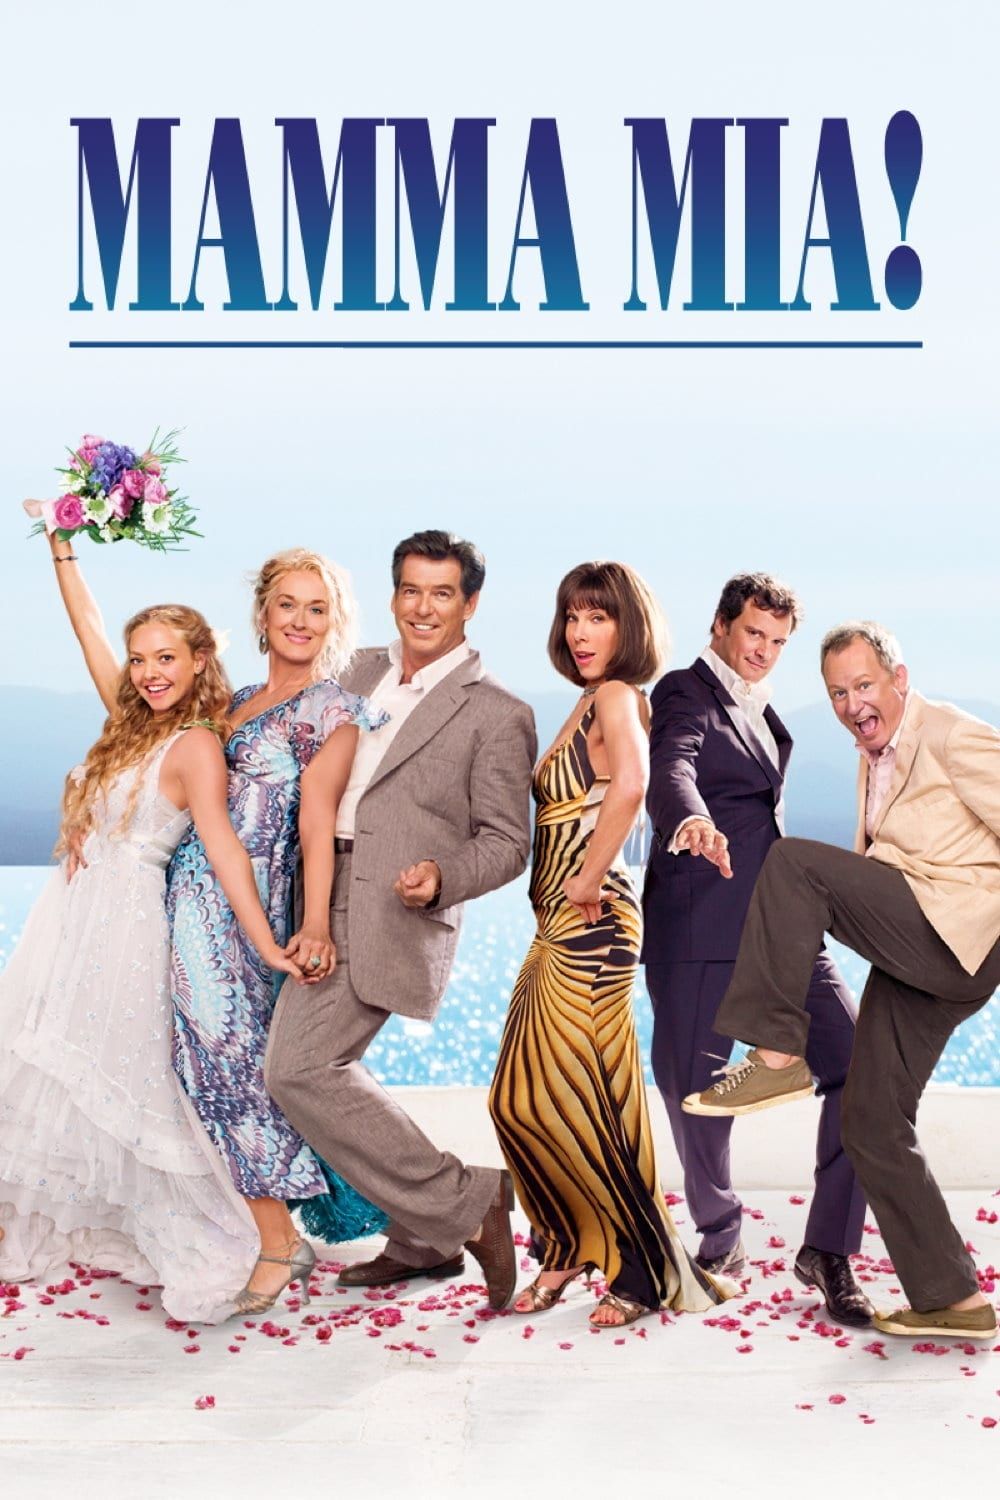 Mamma Mia returning to theaters for 10th anniversary screenings